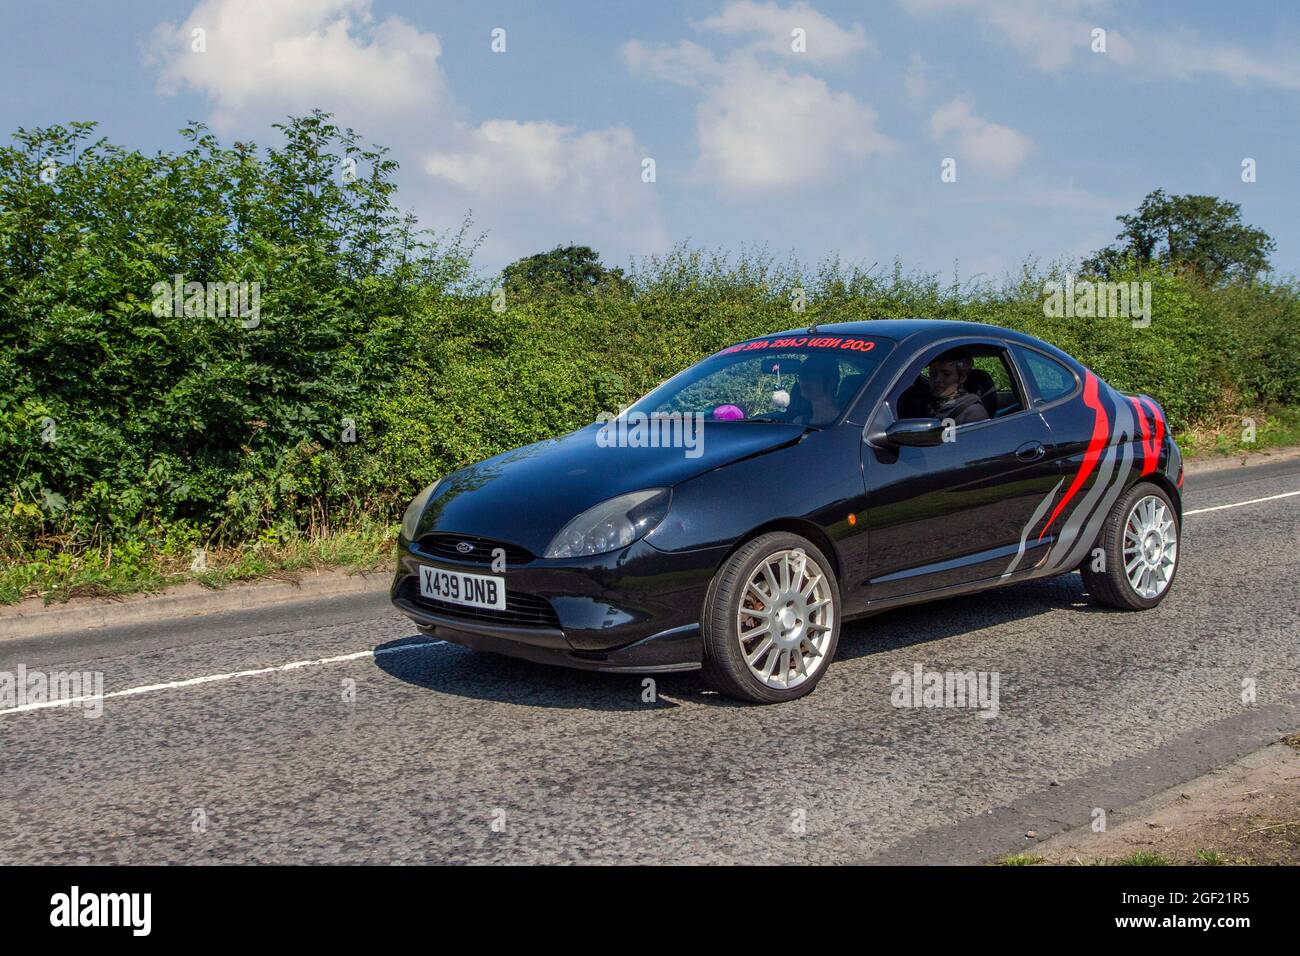 2001 black Ford Puma 1.7 16v Millenium 5 speed manual, 1679cc 2dr coupe  en-route to Capesthorne Hall classic July car show, Cheshire, UK Stock  Photo - Alamy